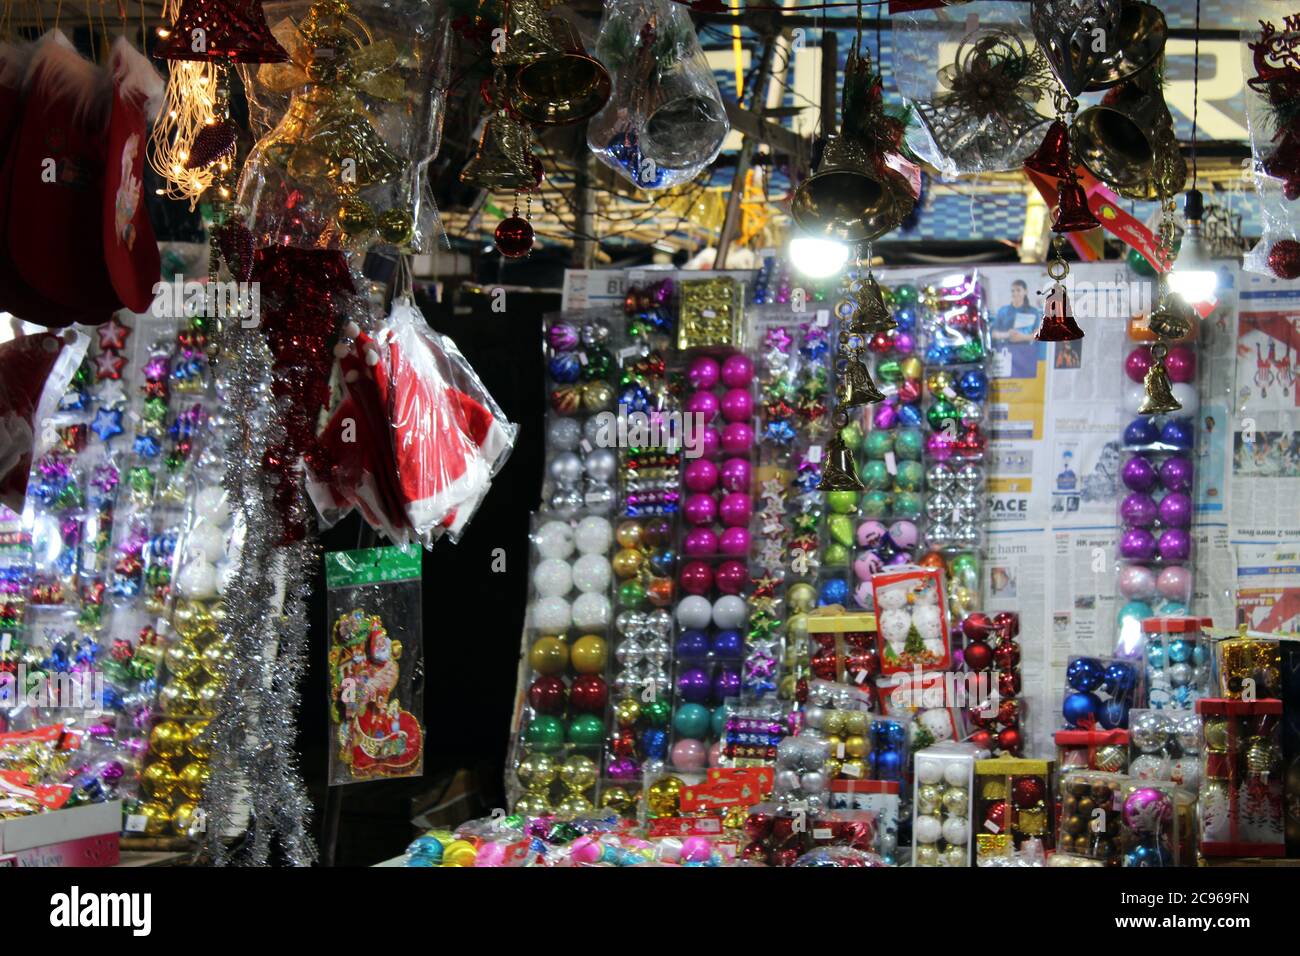 Kolkata, West Bengal/India - December 29, 2019: Various colorful Christmas decoration selling on a open shop at market before Christmas, at Esplanade, Stock Photo